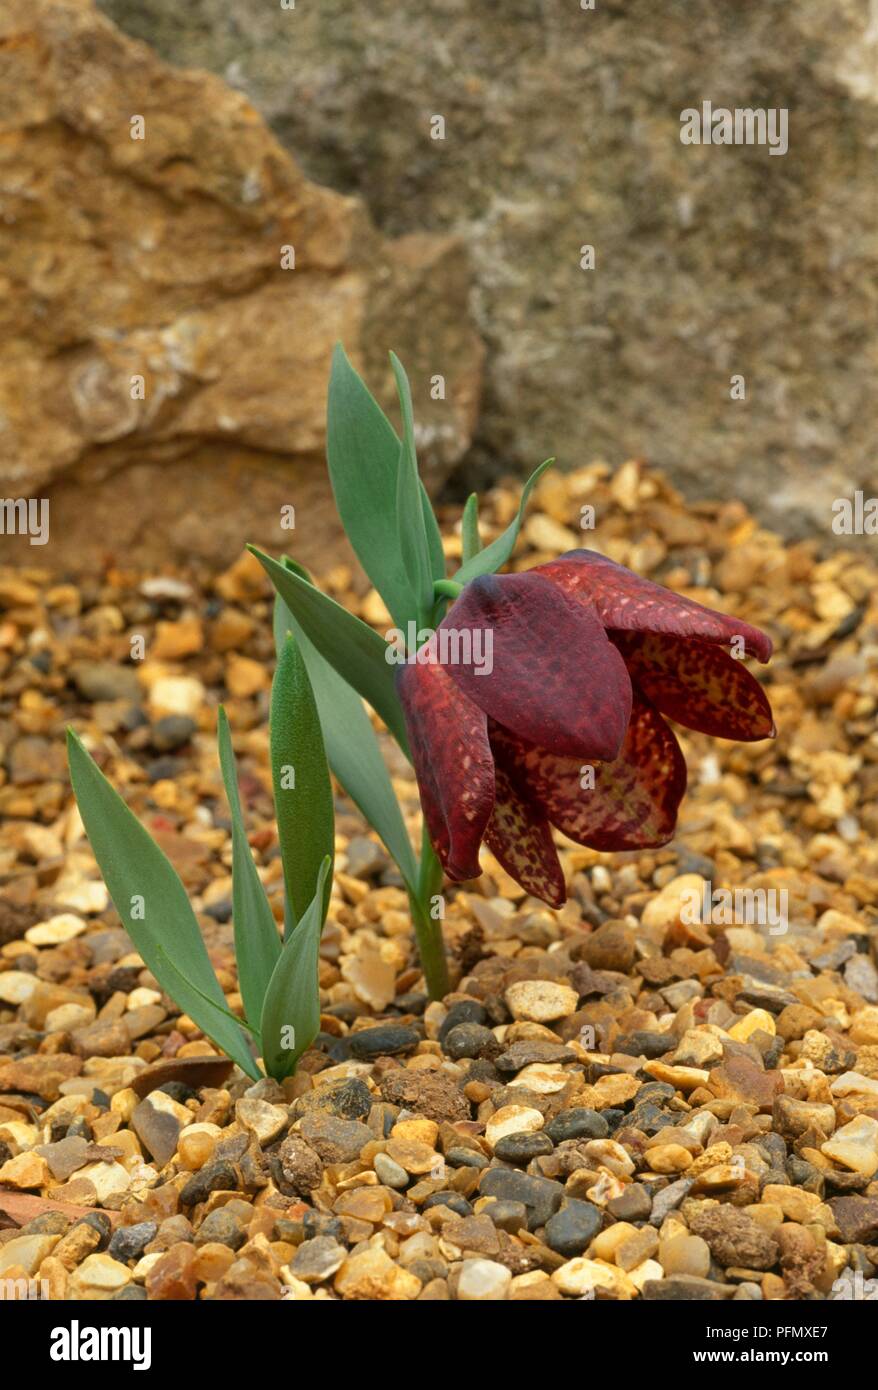 Flower and leaves from Fritillaria latifolia (Fritillary) growing in gravel Stock Photo